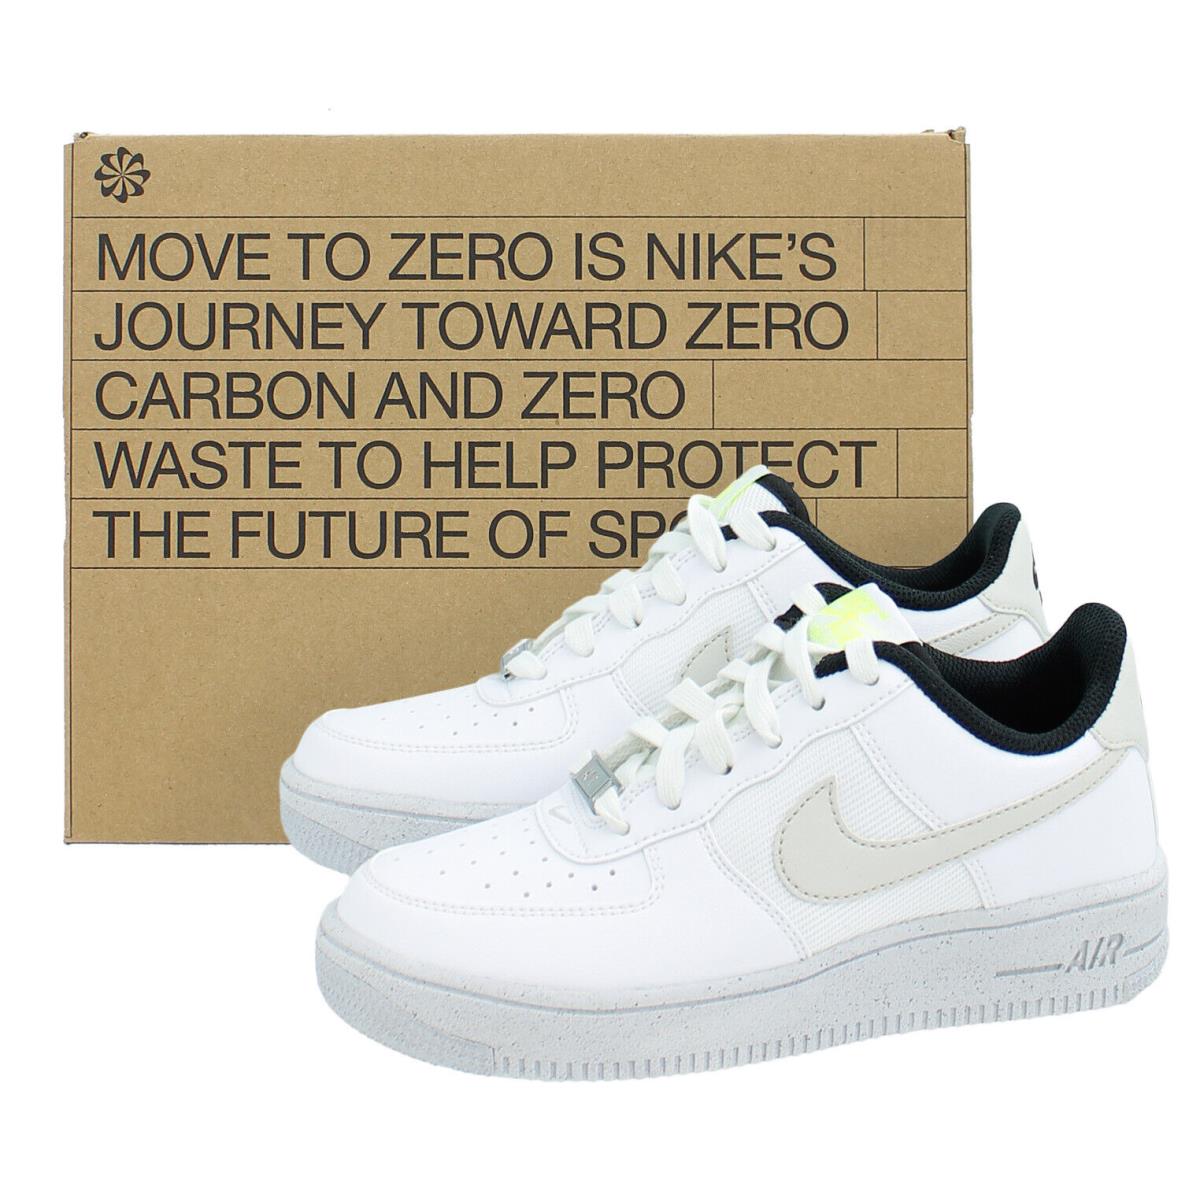 Nike Air Force 1 Sneakers DH8695 Youth Crater NN Low Top Leather Retro Shoes